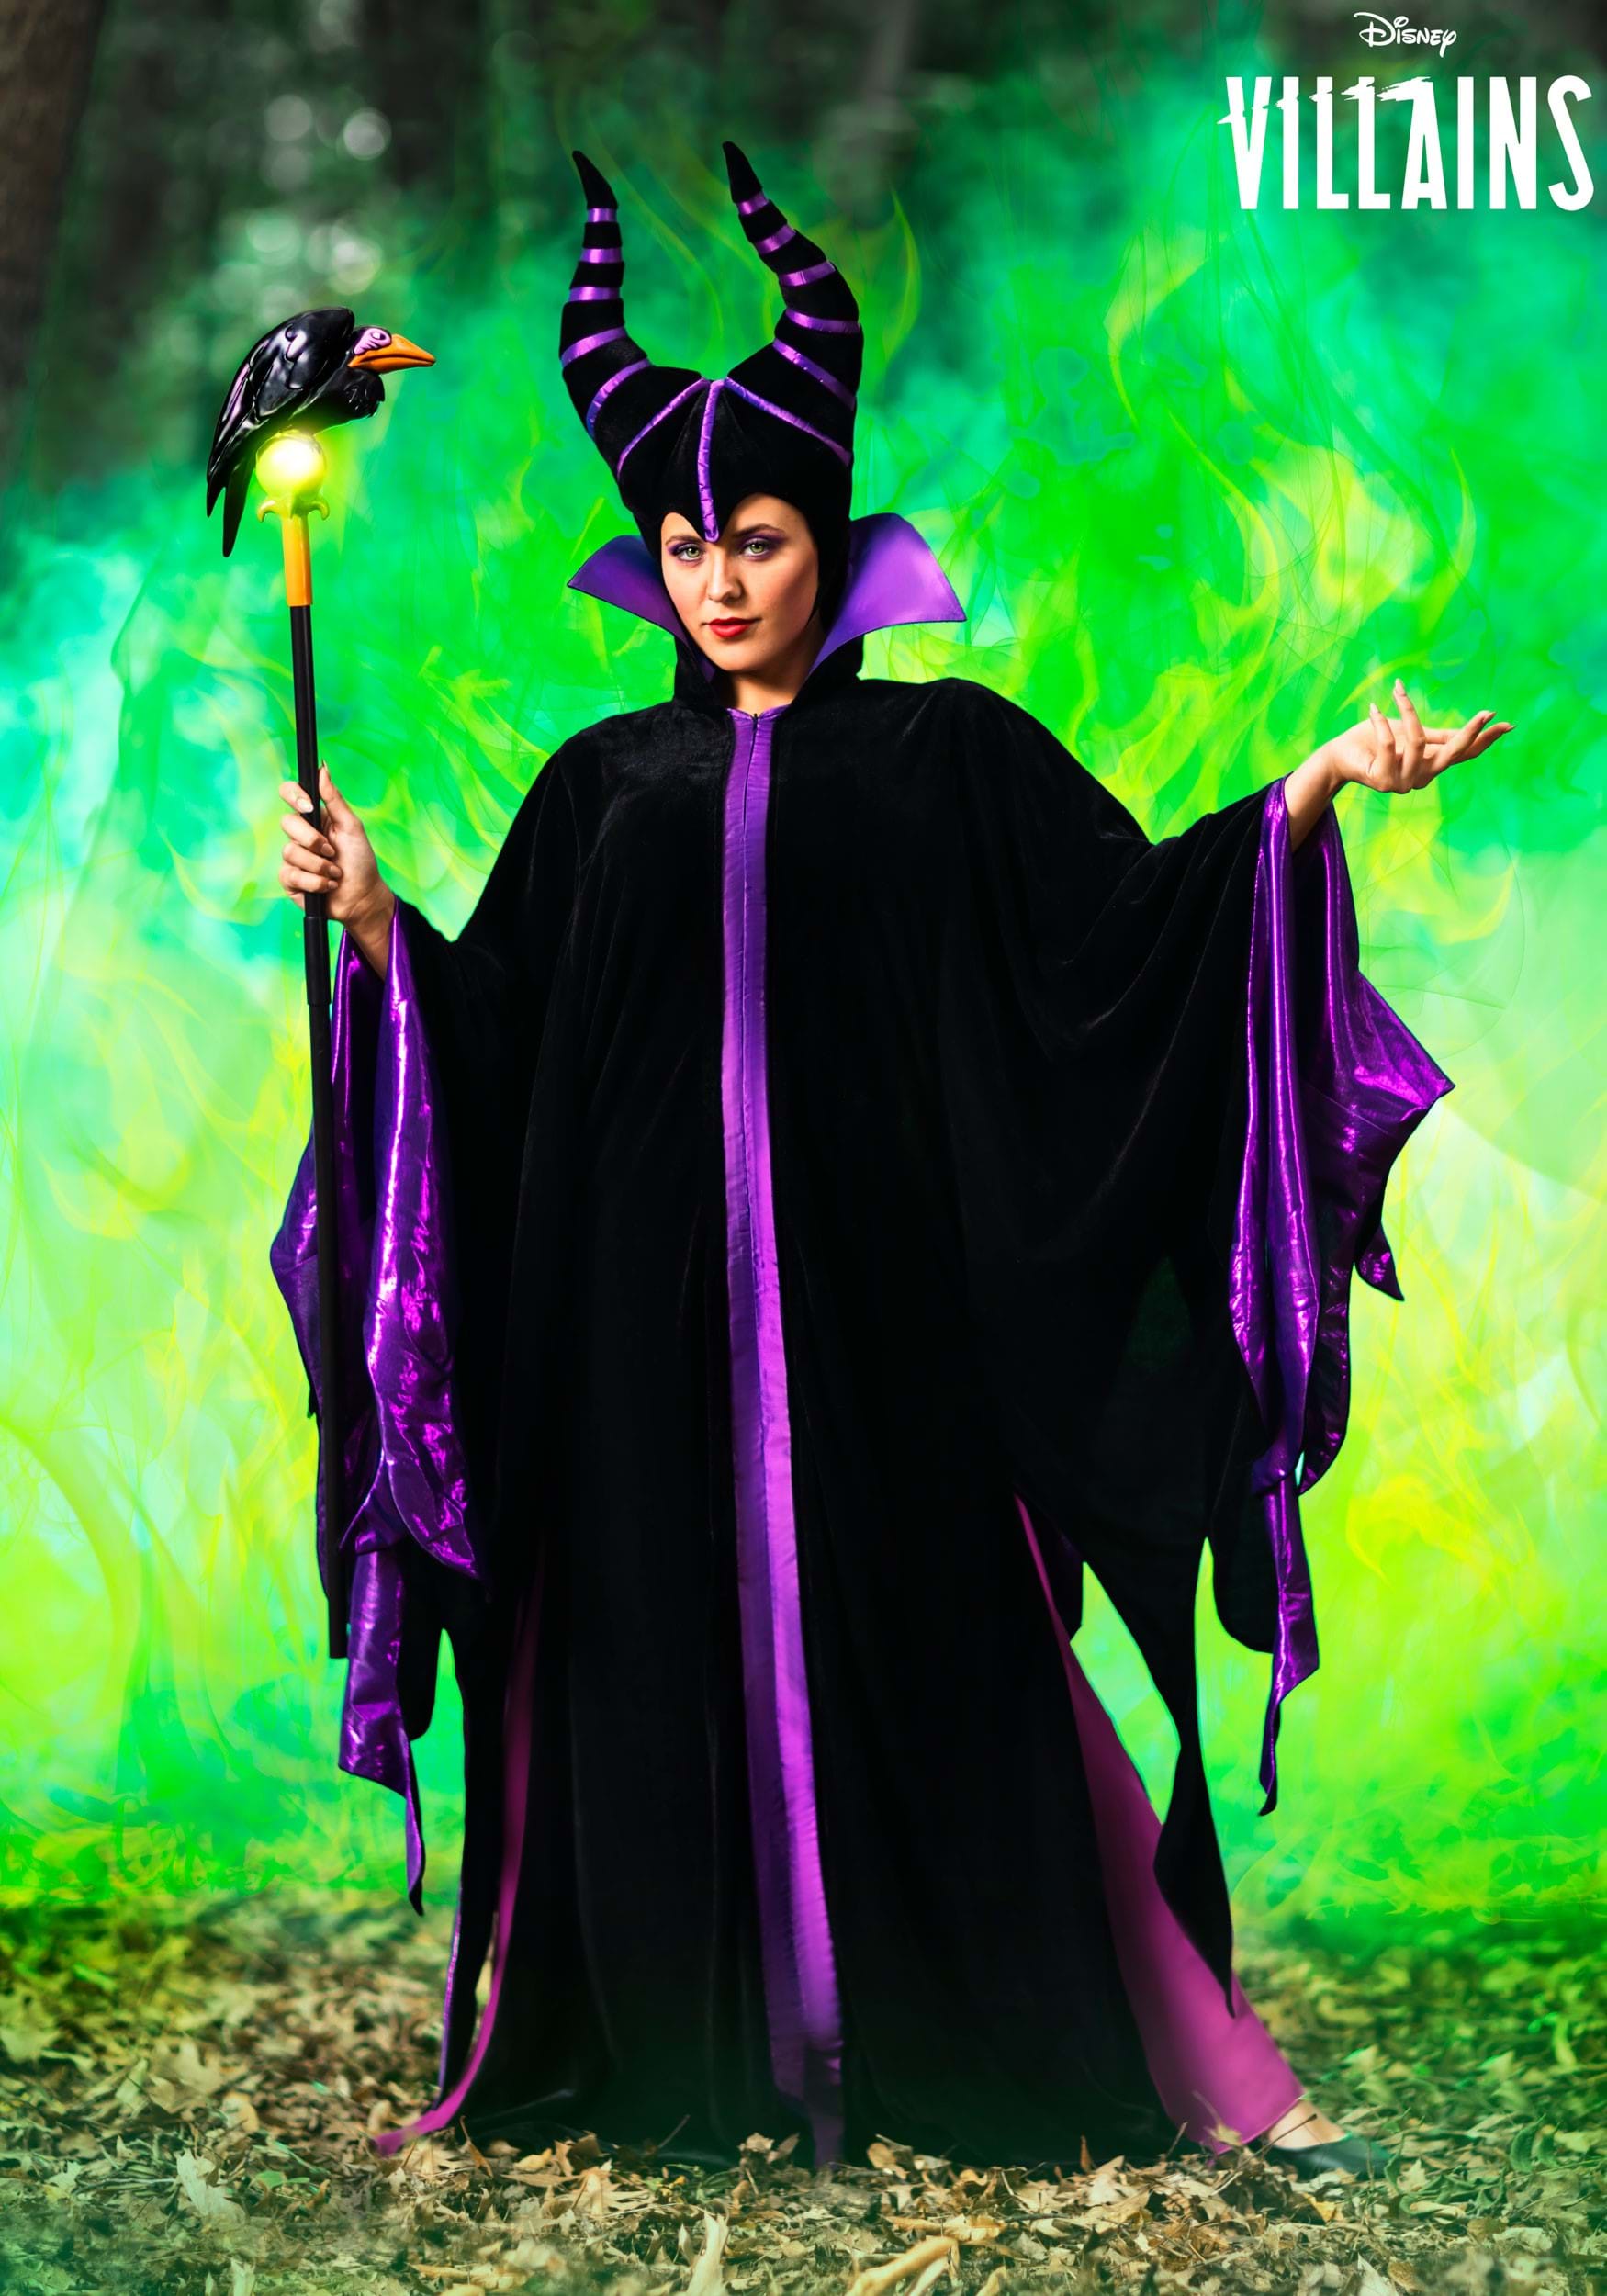 https://images.halloweencostumes.ca/products/74427/1-1/adult-classic-maleficent-costume-2.jpg